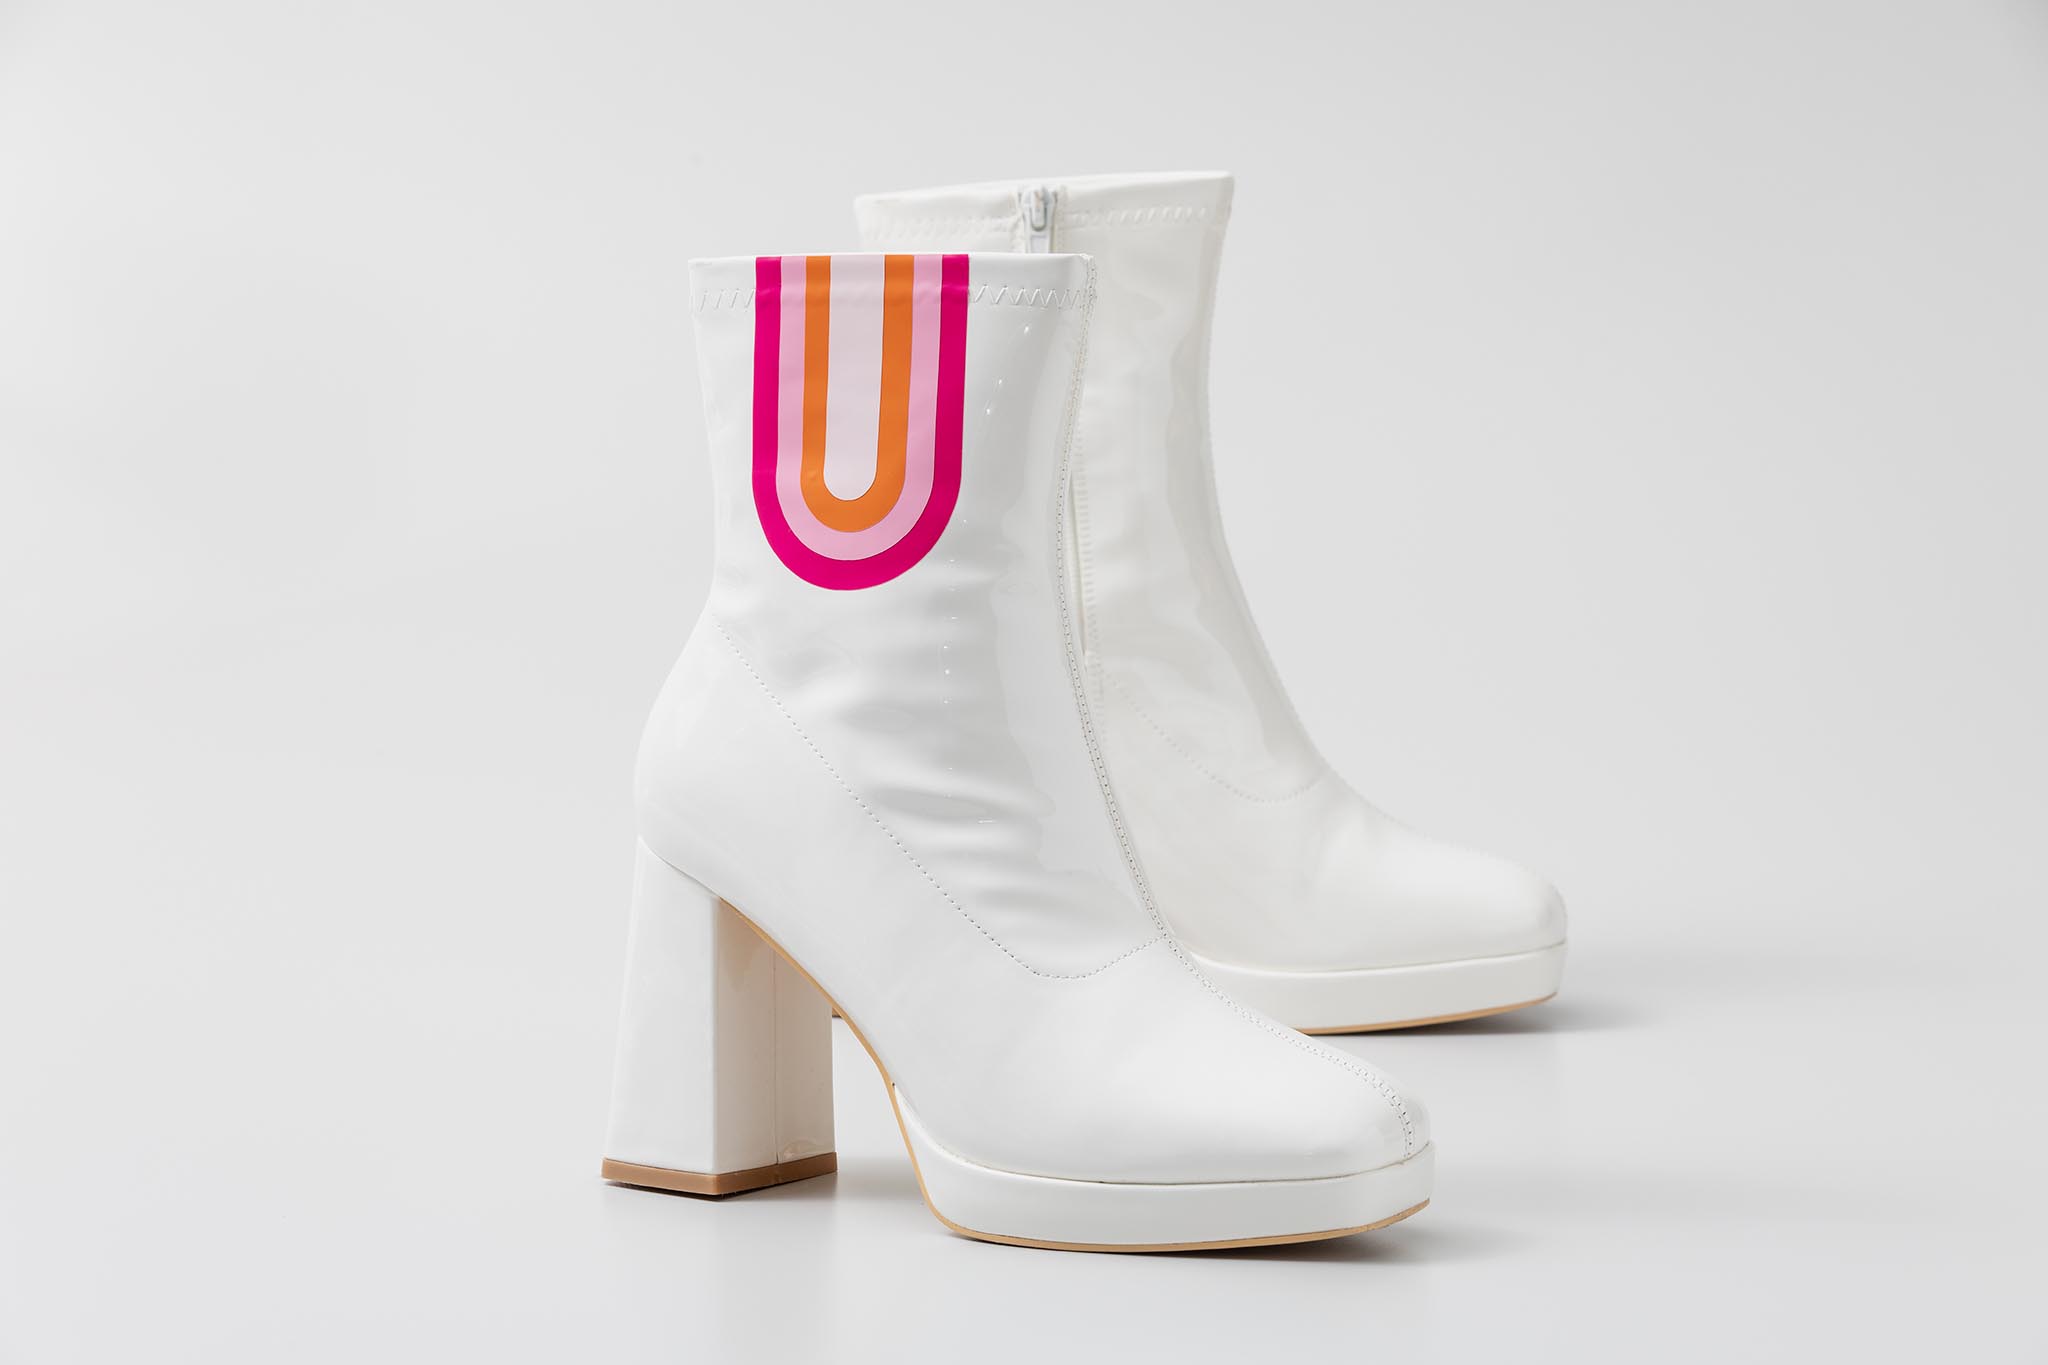 Groovy gogo boots